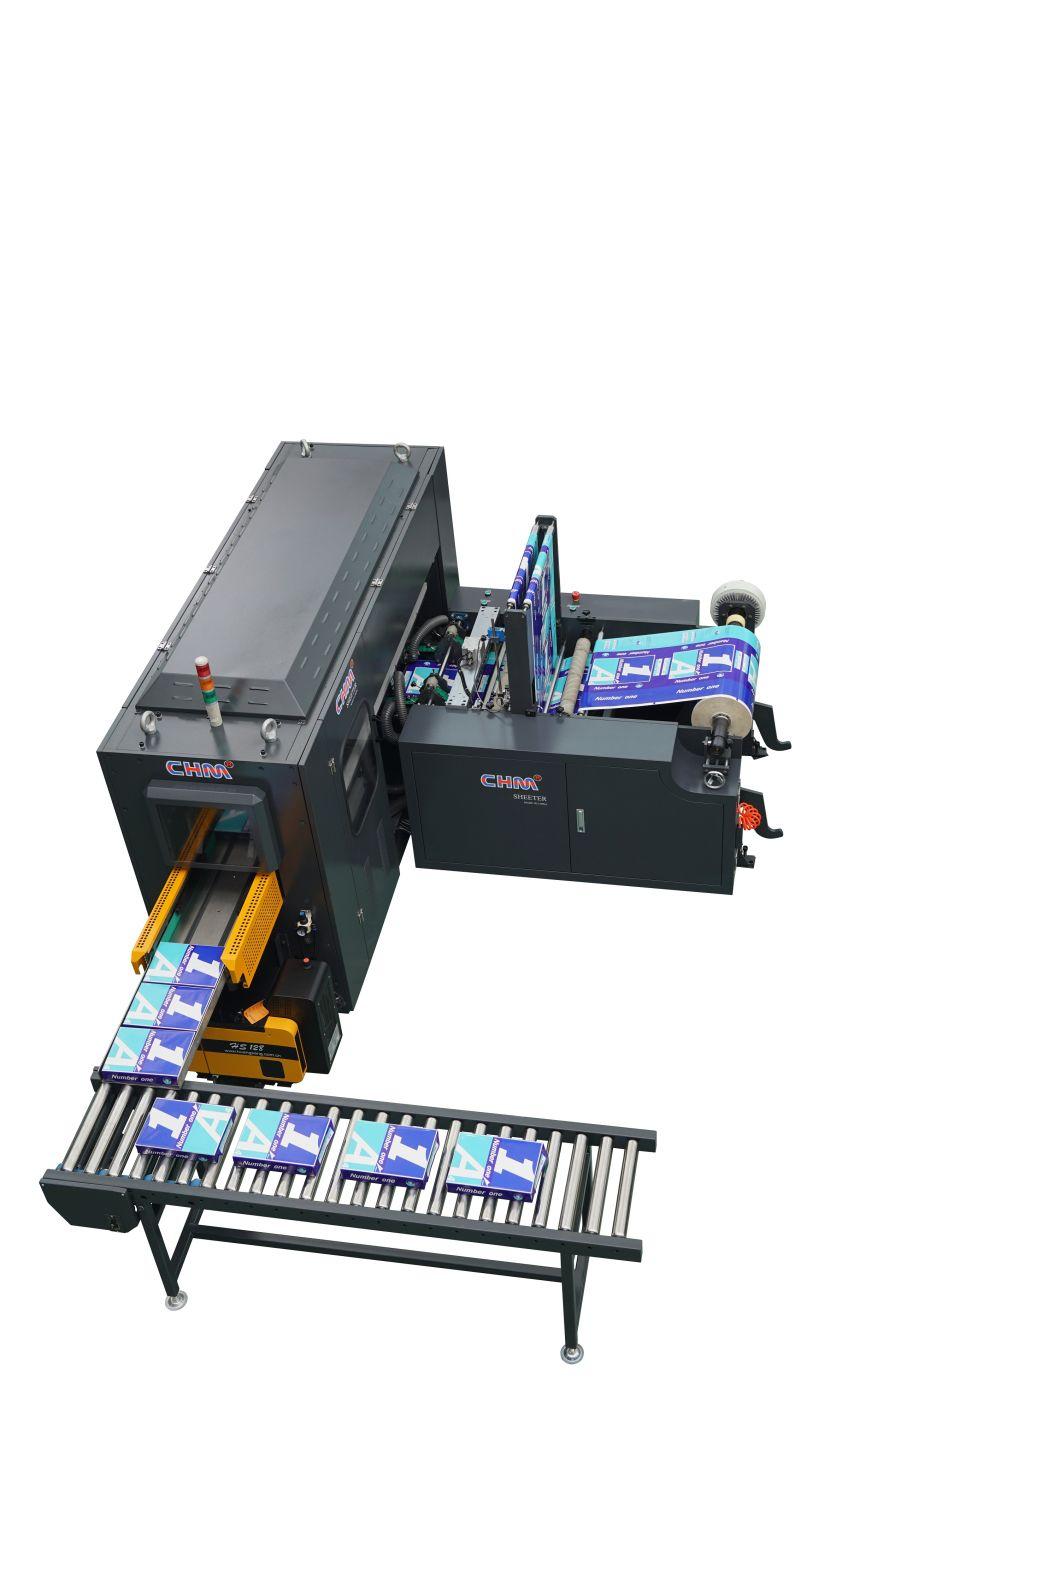 A4 Copy Paper Cutting and Packing Machine